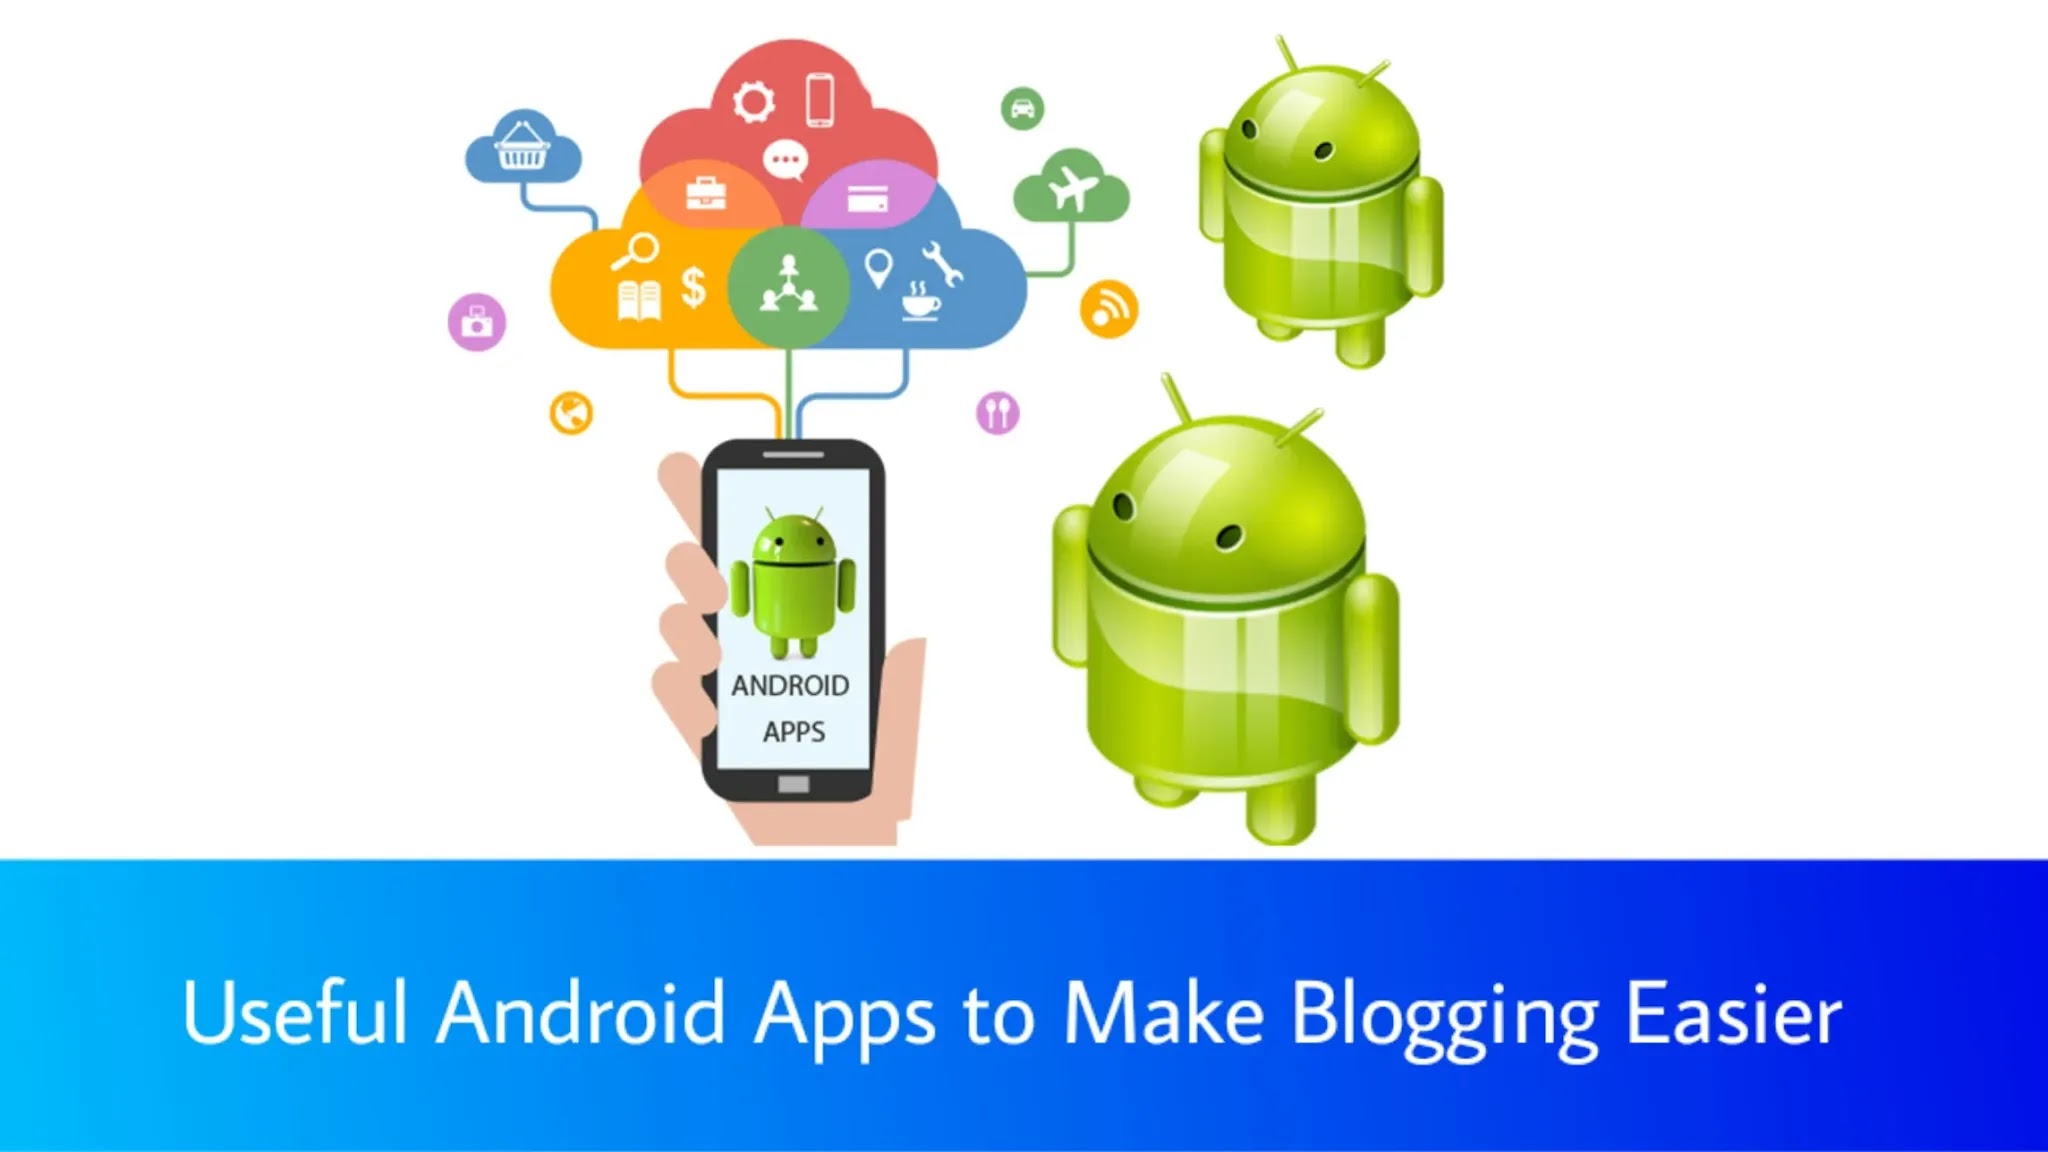 Useful Android Apps to Make Blogging Easier